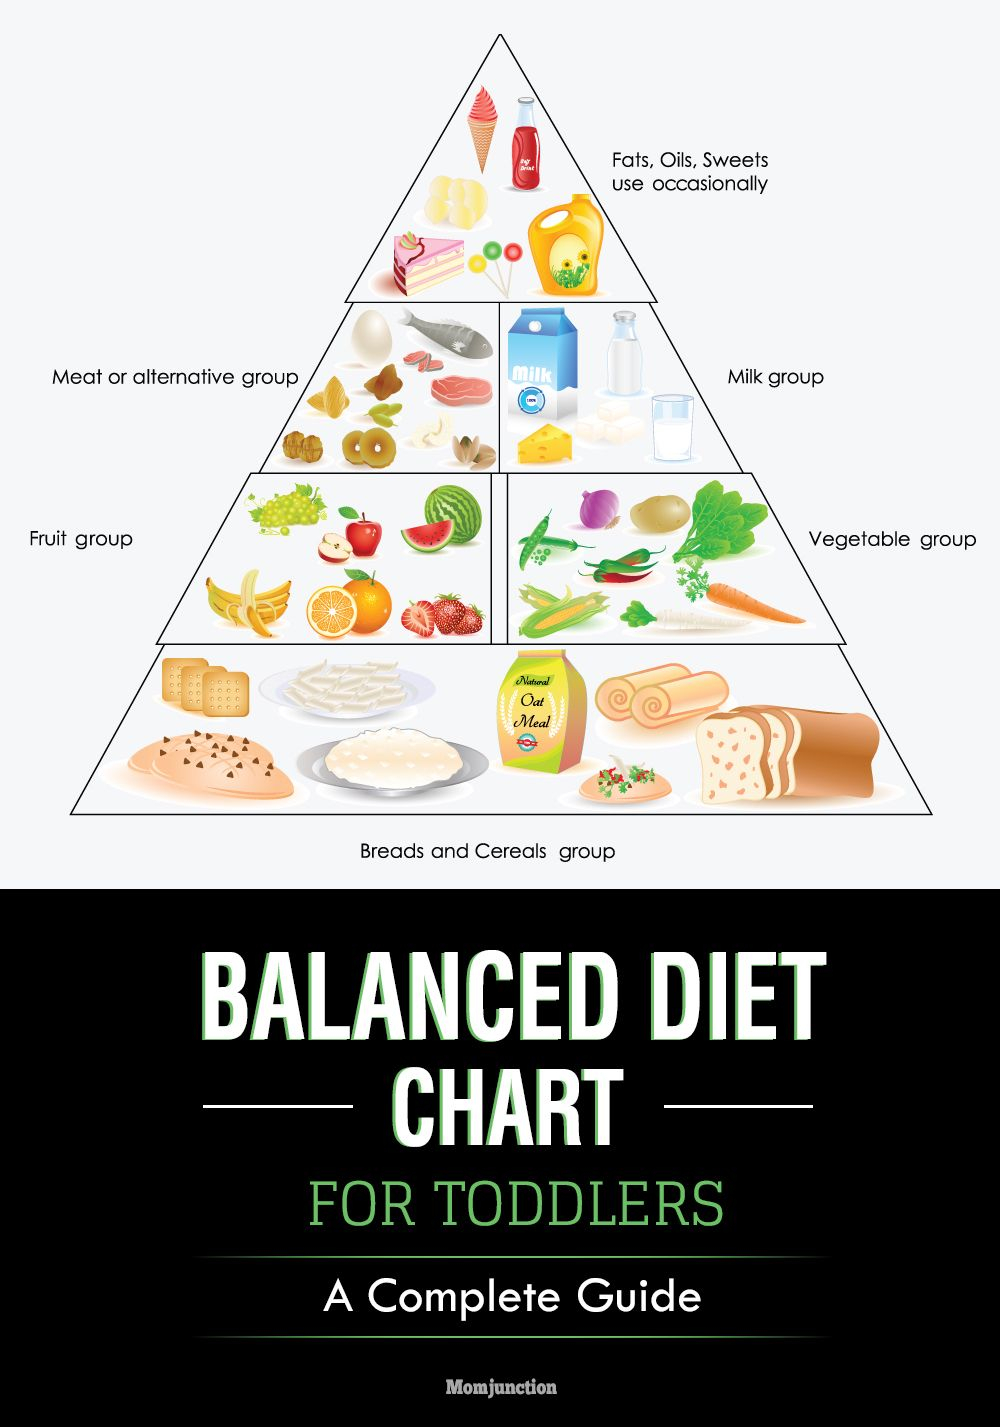 How Much Food Should A Baby Eat Balanced Diet Chart 